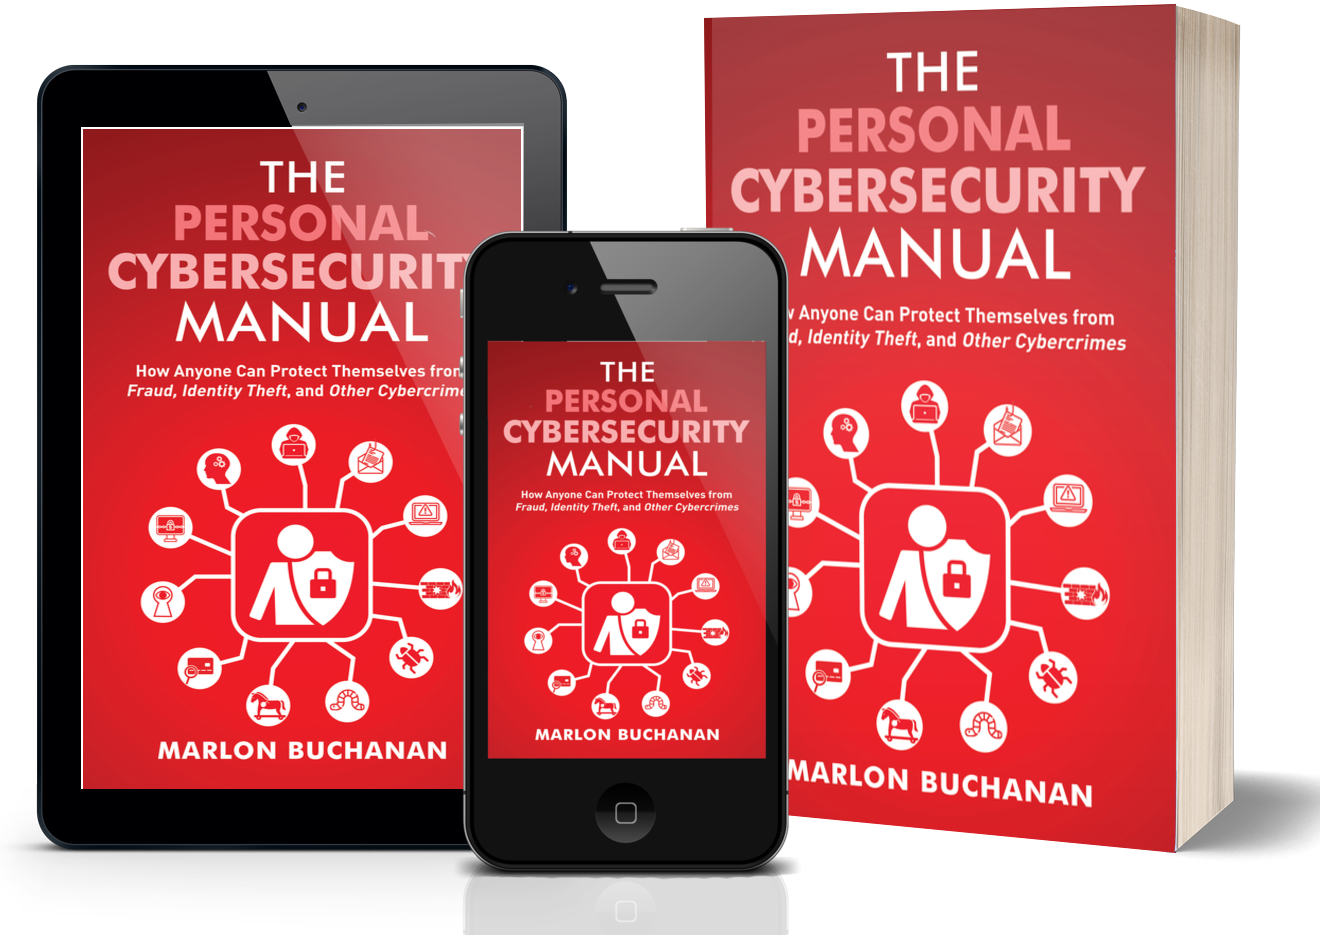 The Personal Cybersecurity Manual Covers